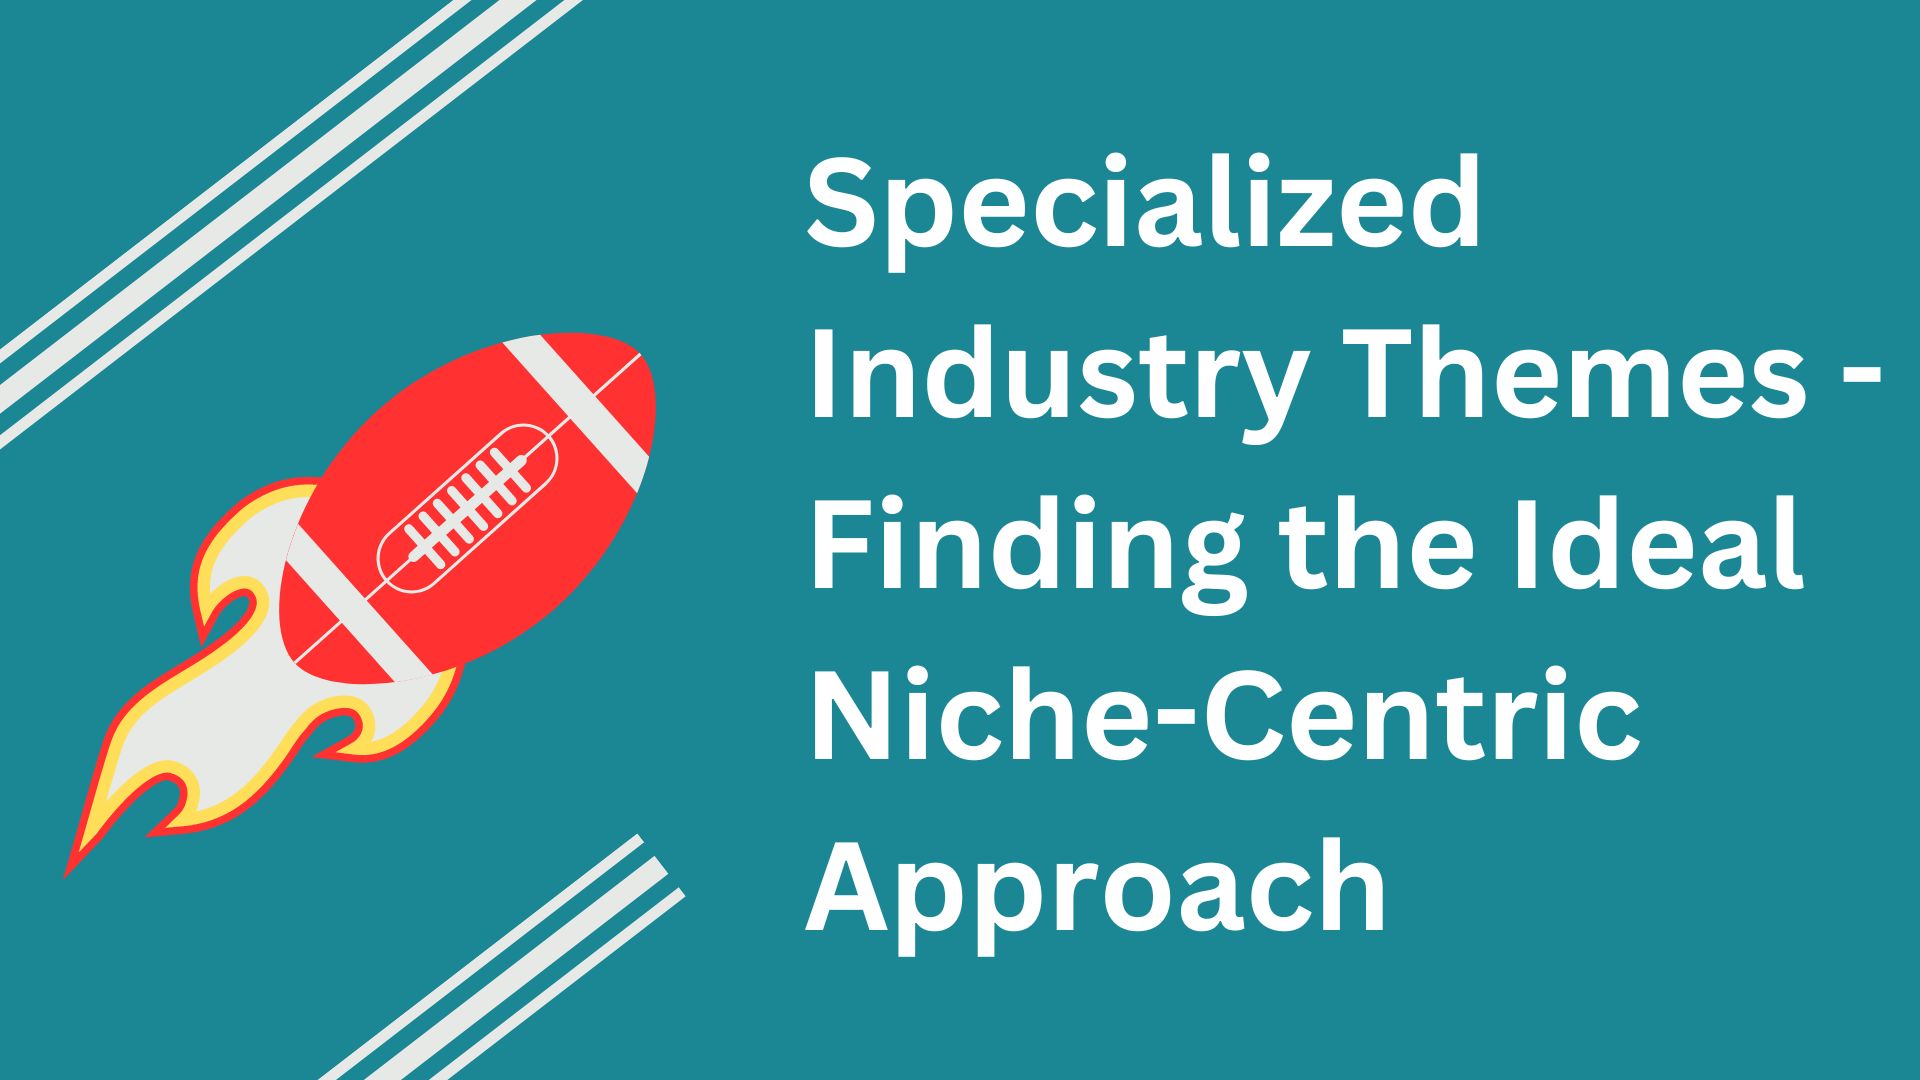 Specialized Industry Themes - Finding the Ideal Niche-Centric Approach